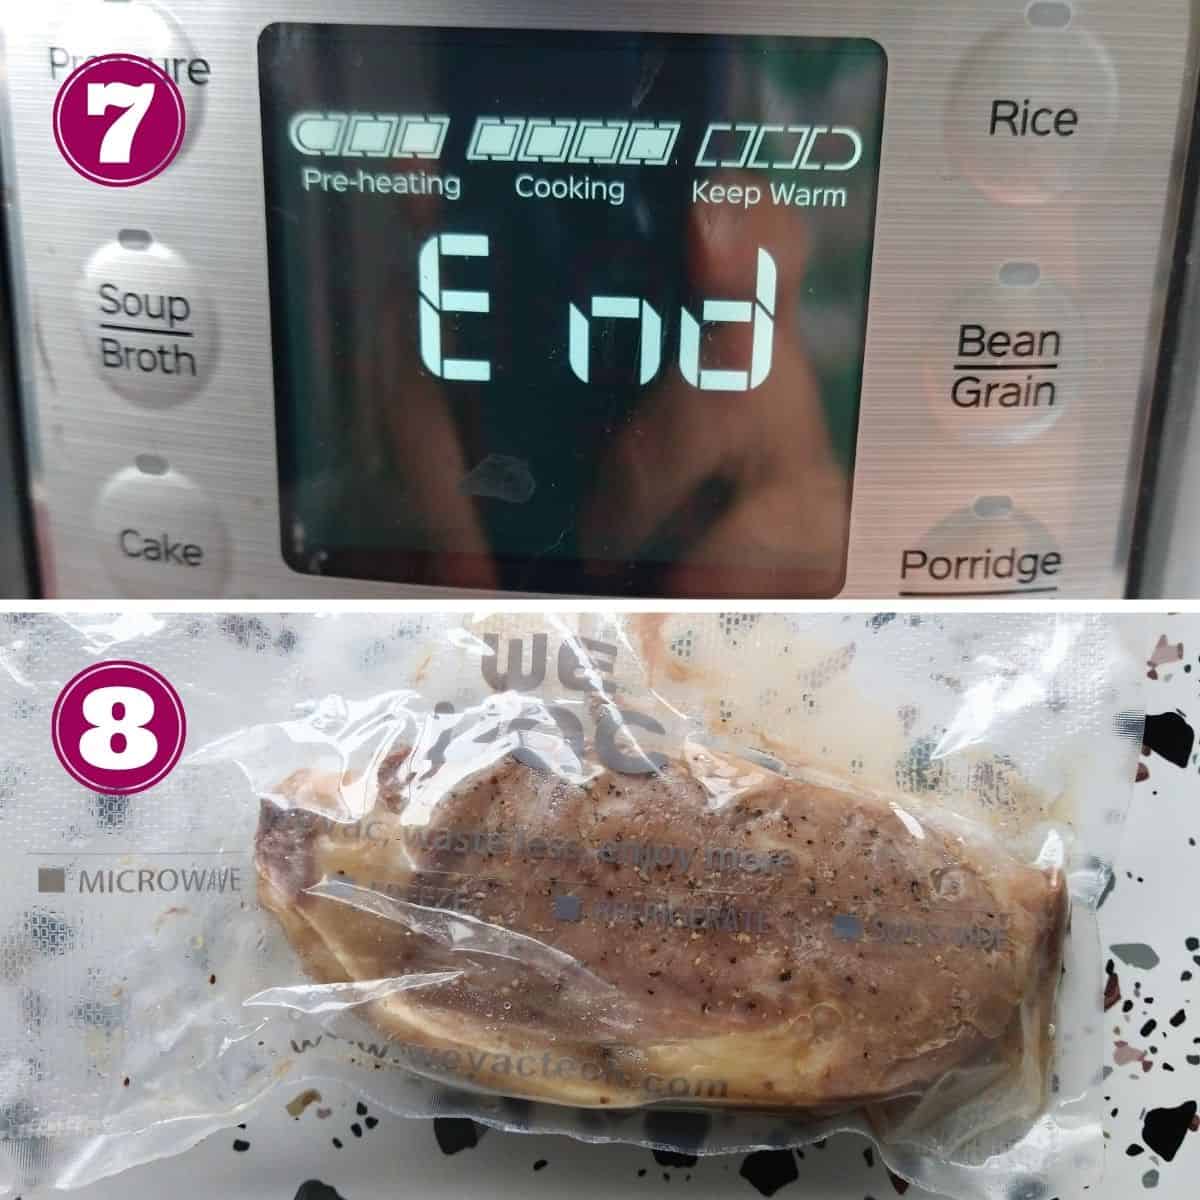 Step 7 shows the Instant Pot reading "end".
Step 8 shows the finished steak in a vacuum sealed bag on the table.